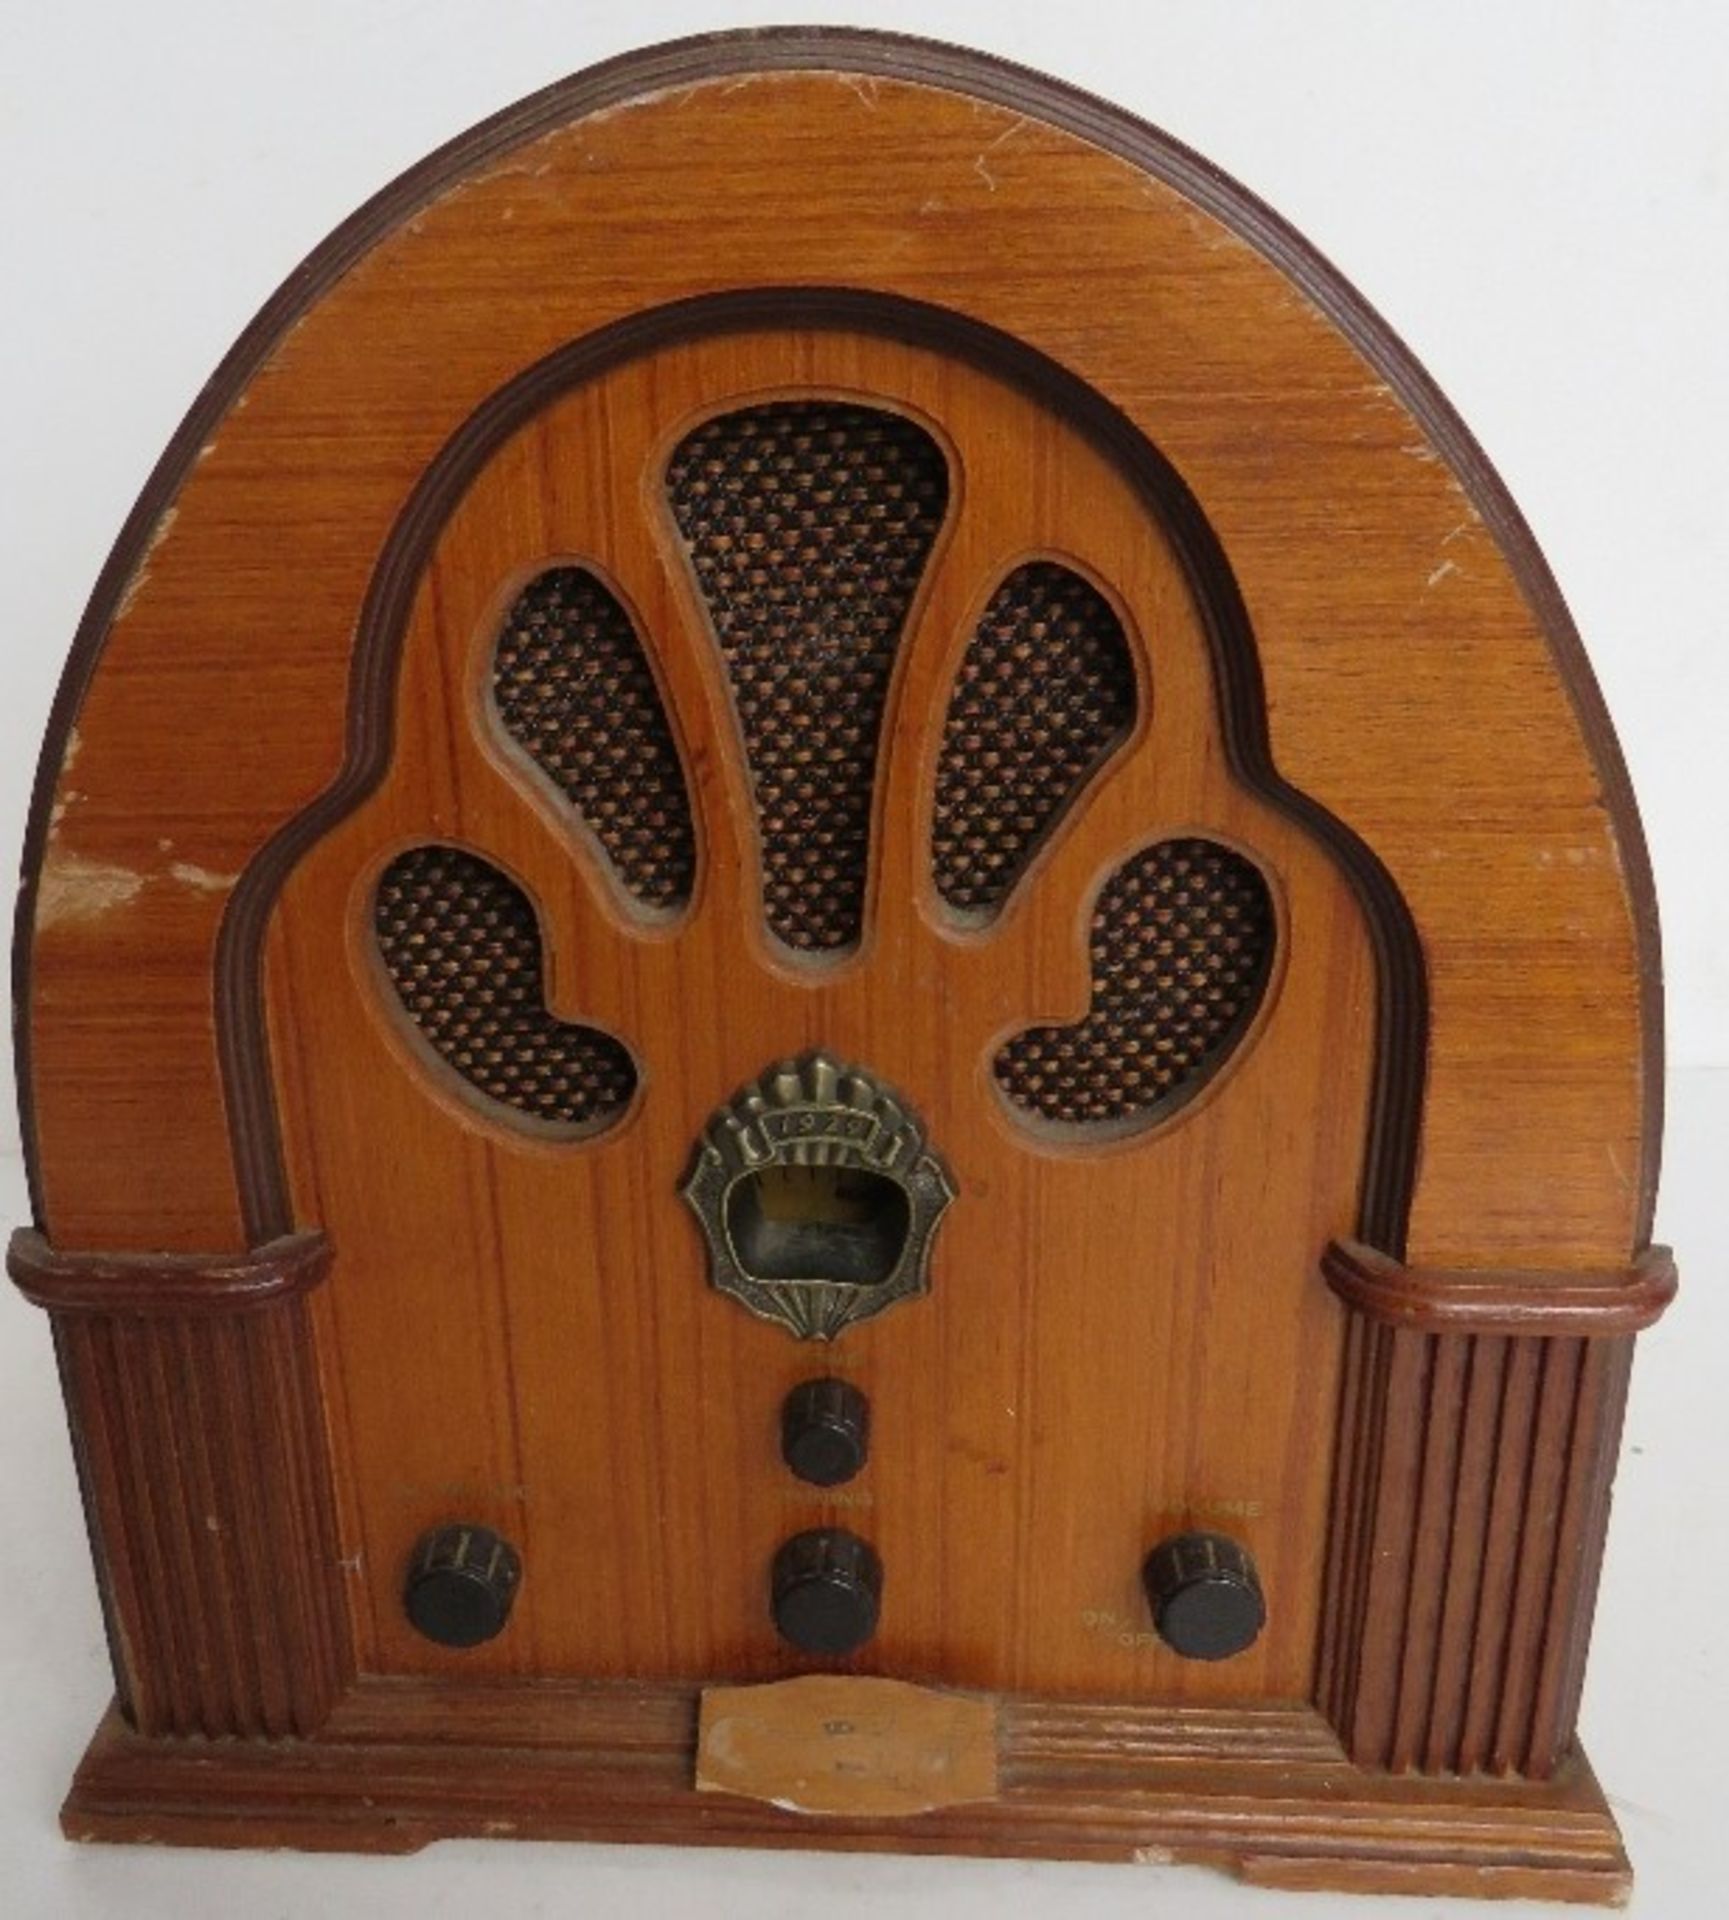 A Steepletone Radio. Disclaimer - all items in this sale are sold as untested without guarantee.